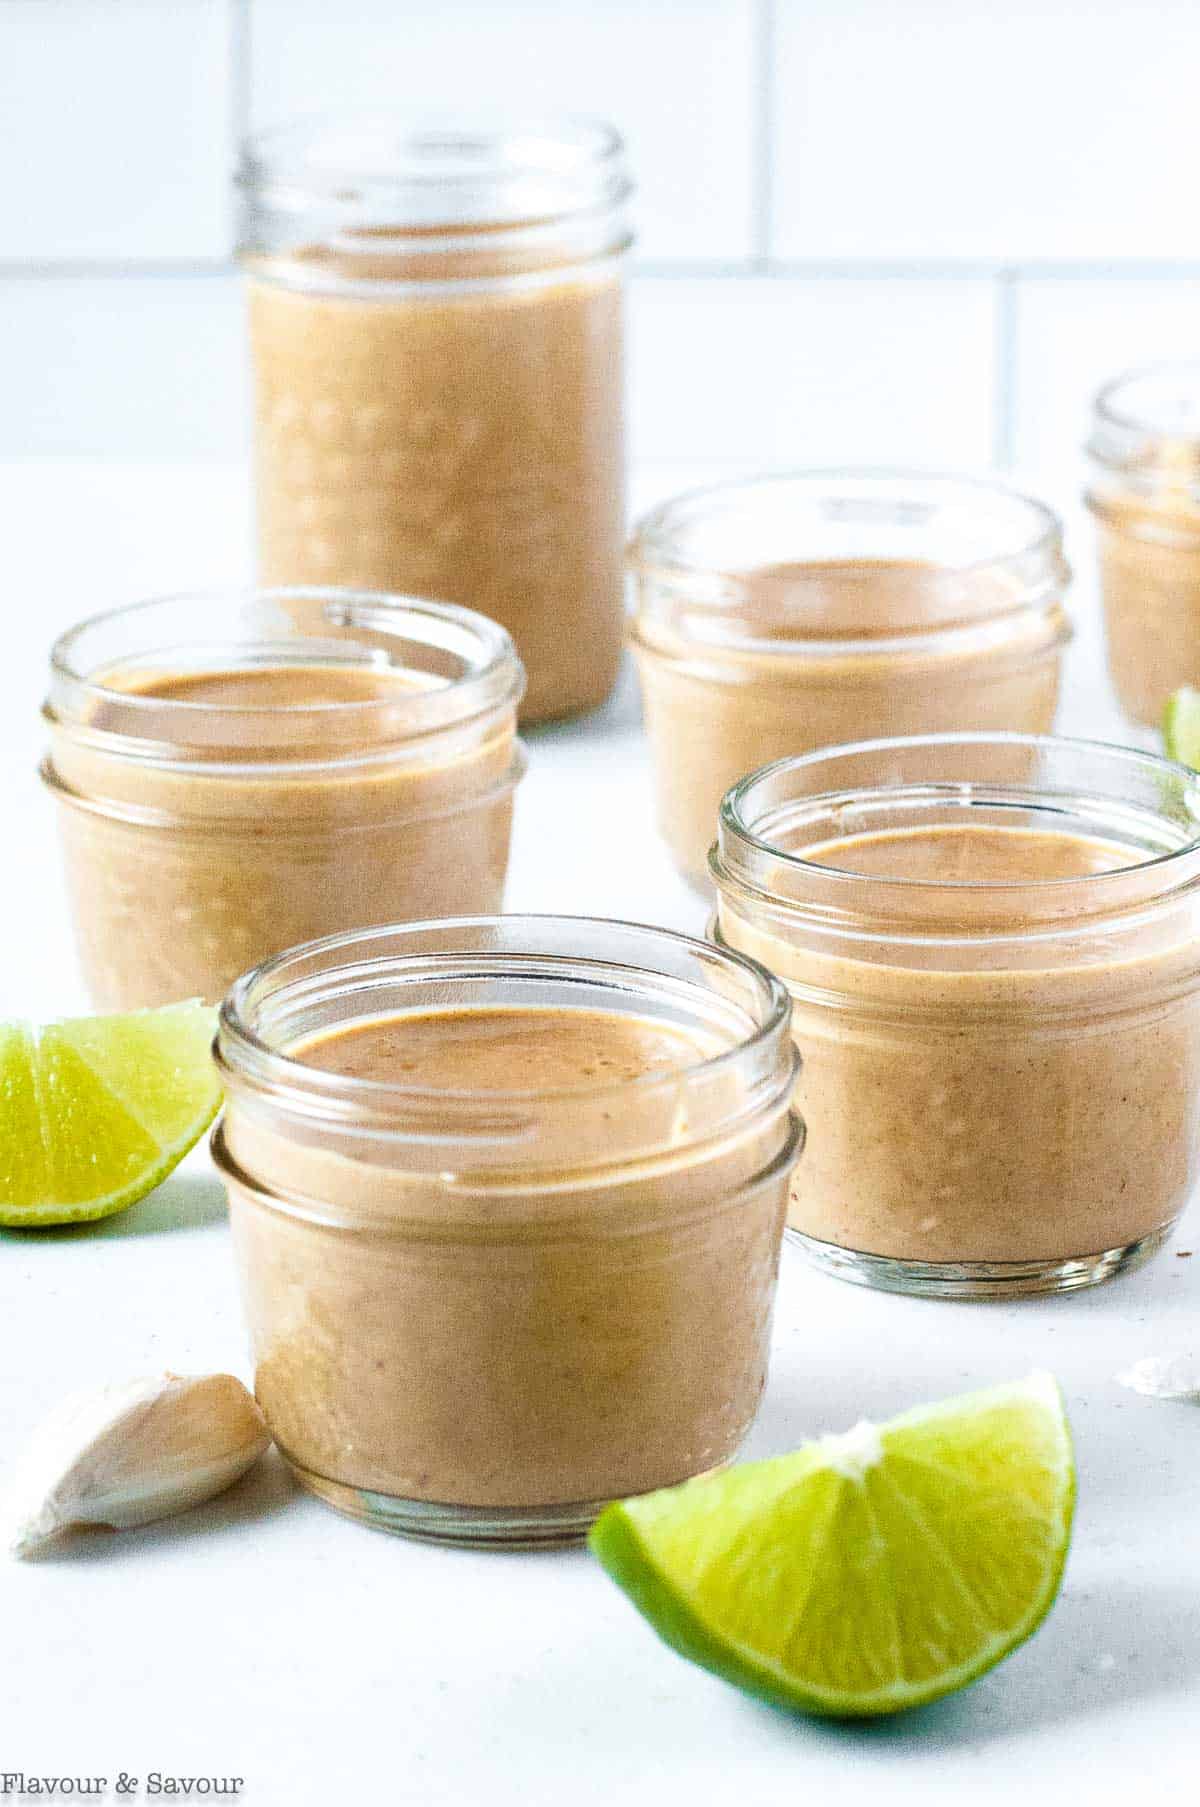 Small jars of peanut sauce with lime slices beside them.